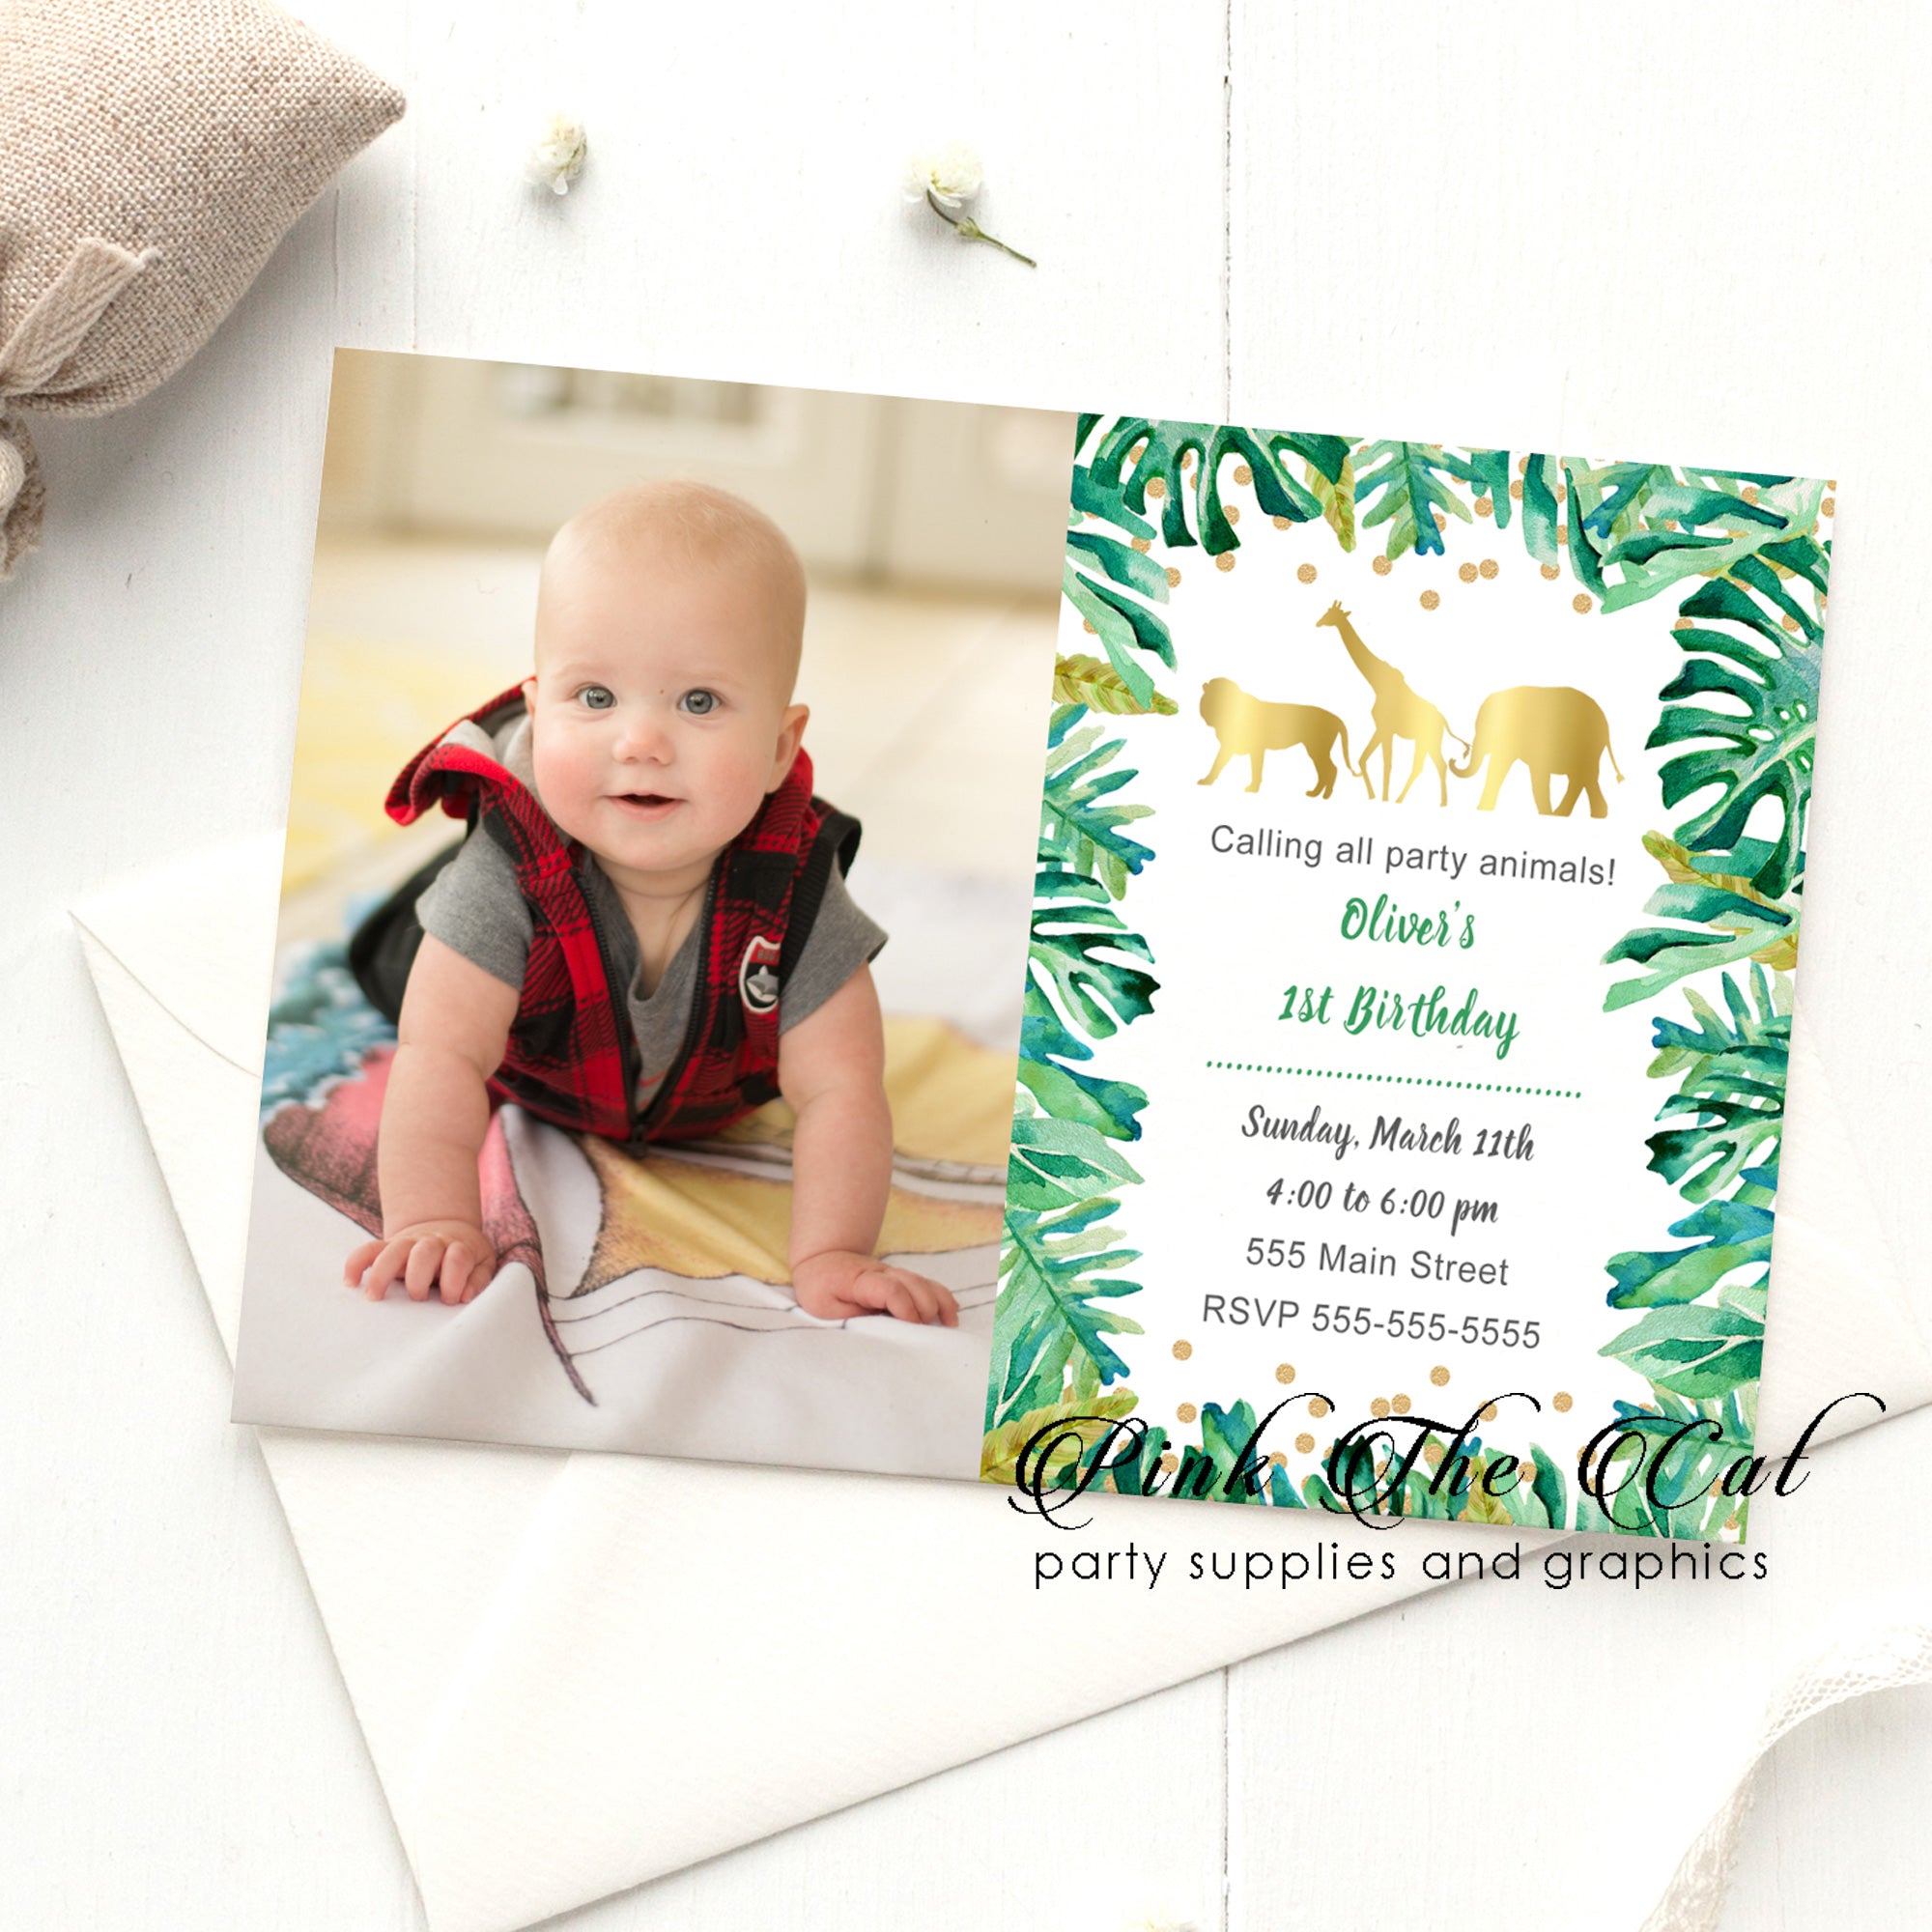 Jungle invitations with photo boy birthday party (set of 30)